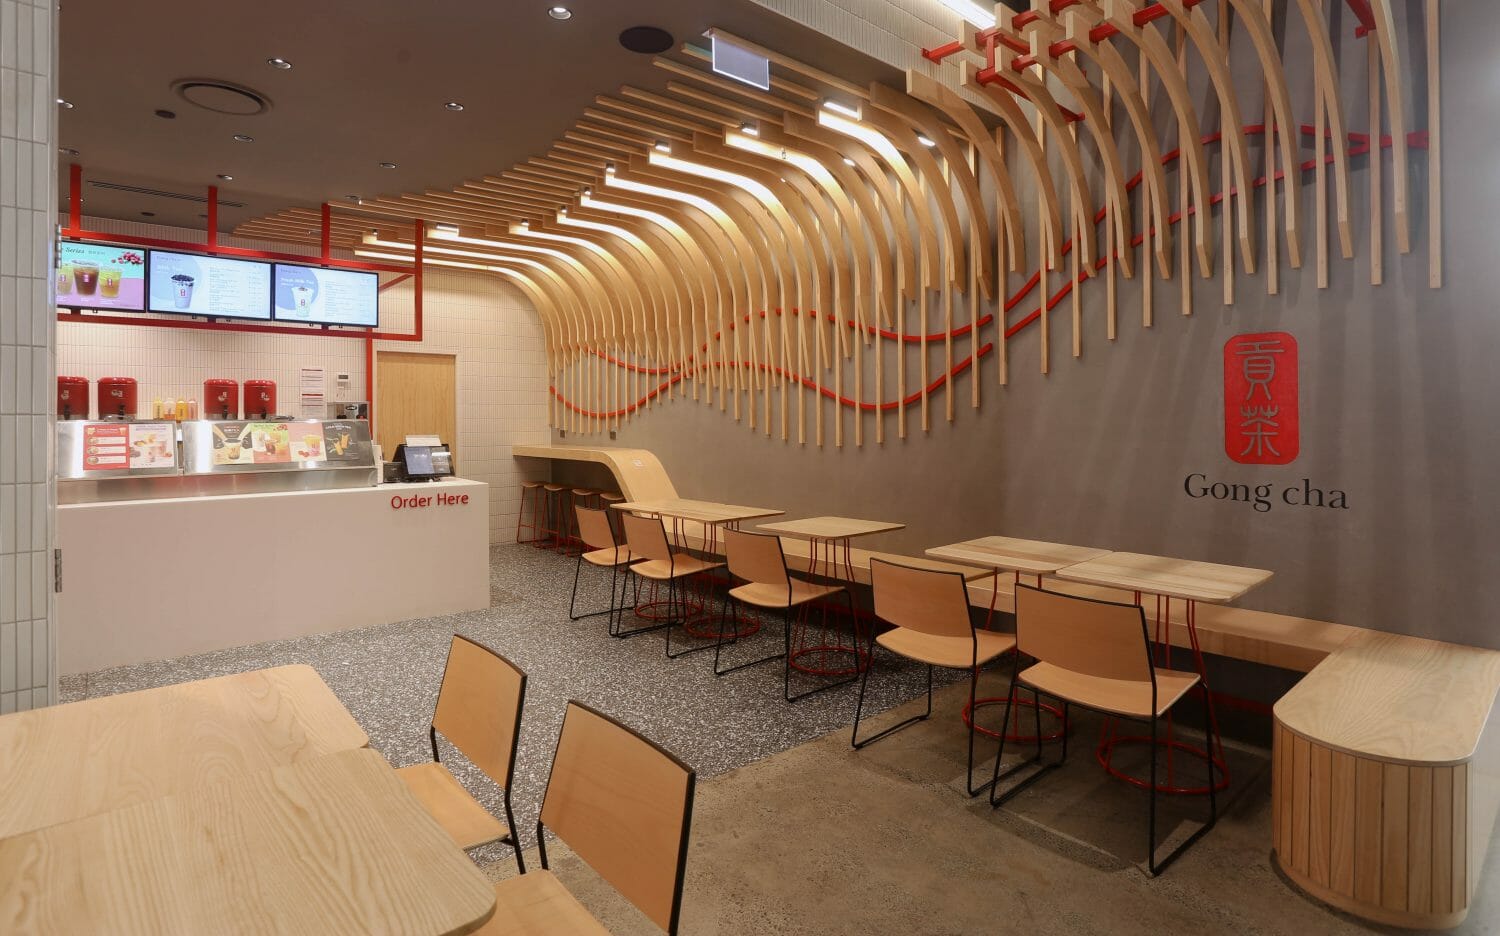 Interior design for Gong Cha